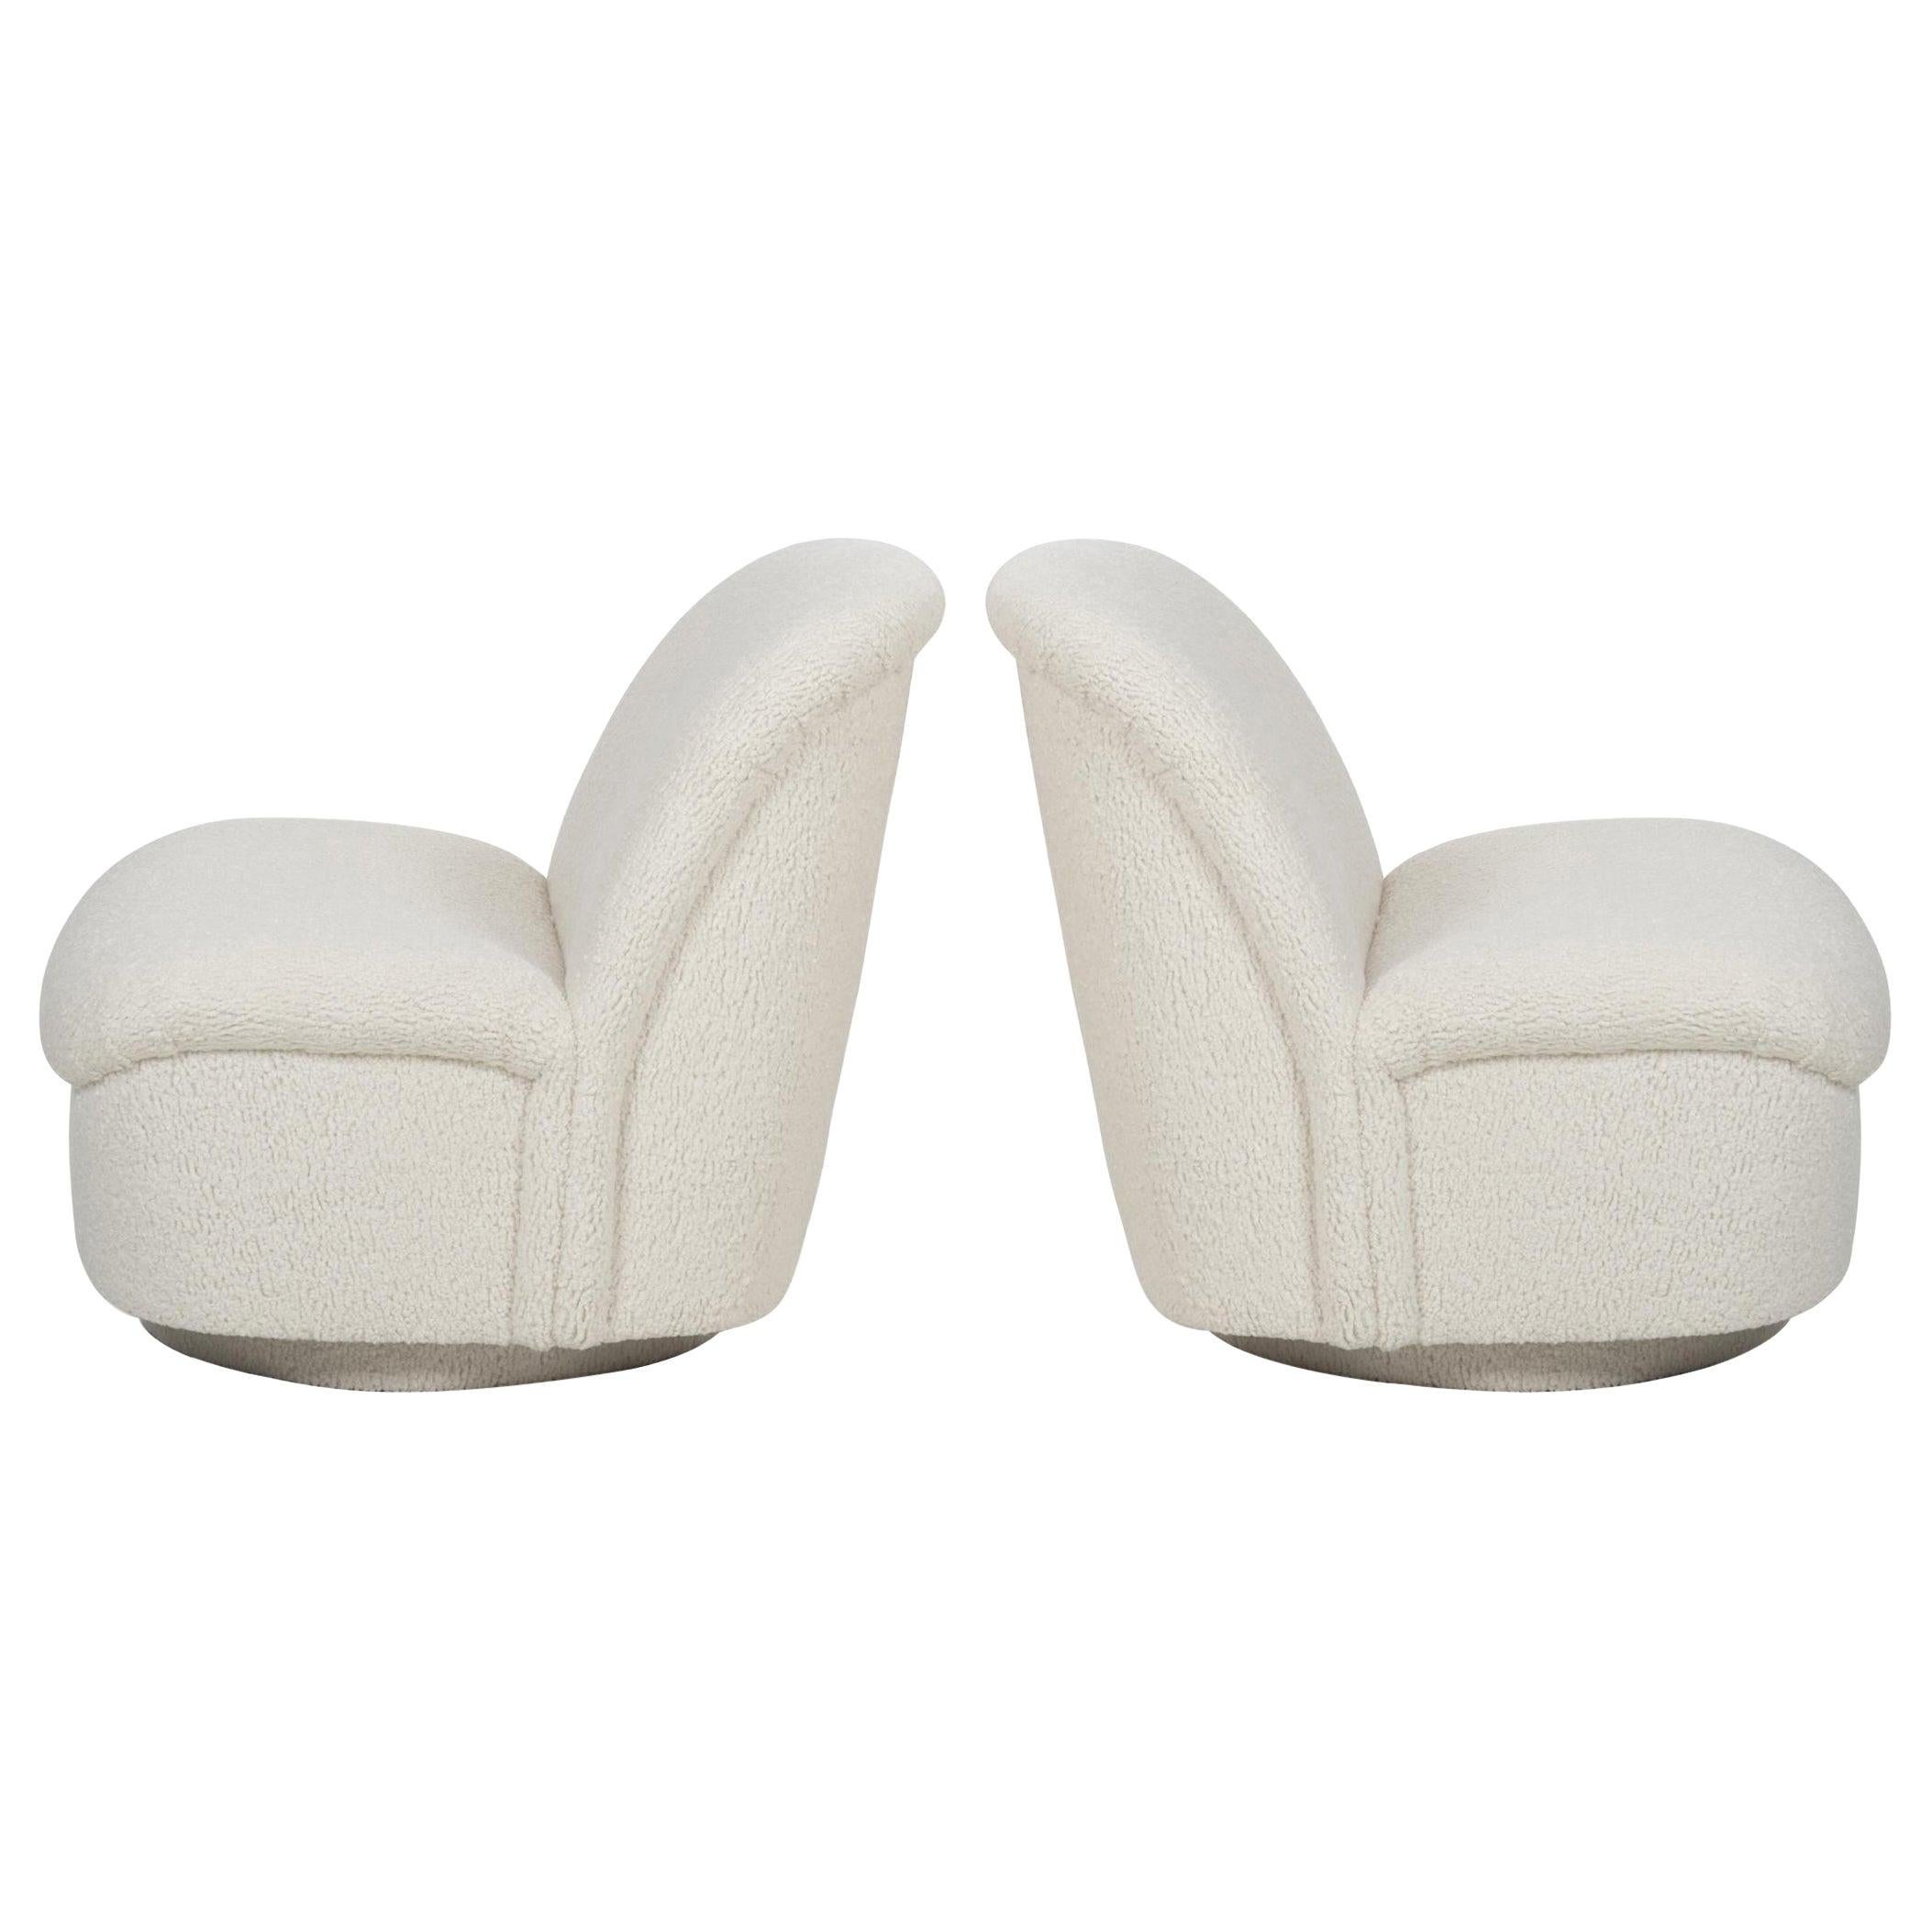 Pair of Vladimir Kagan Swivel Lounge Chairs for Preview